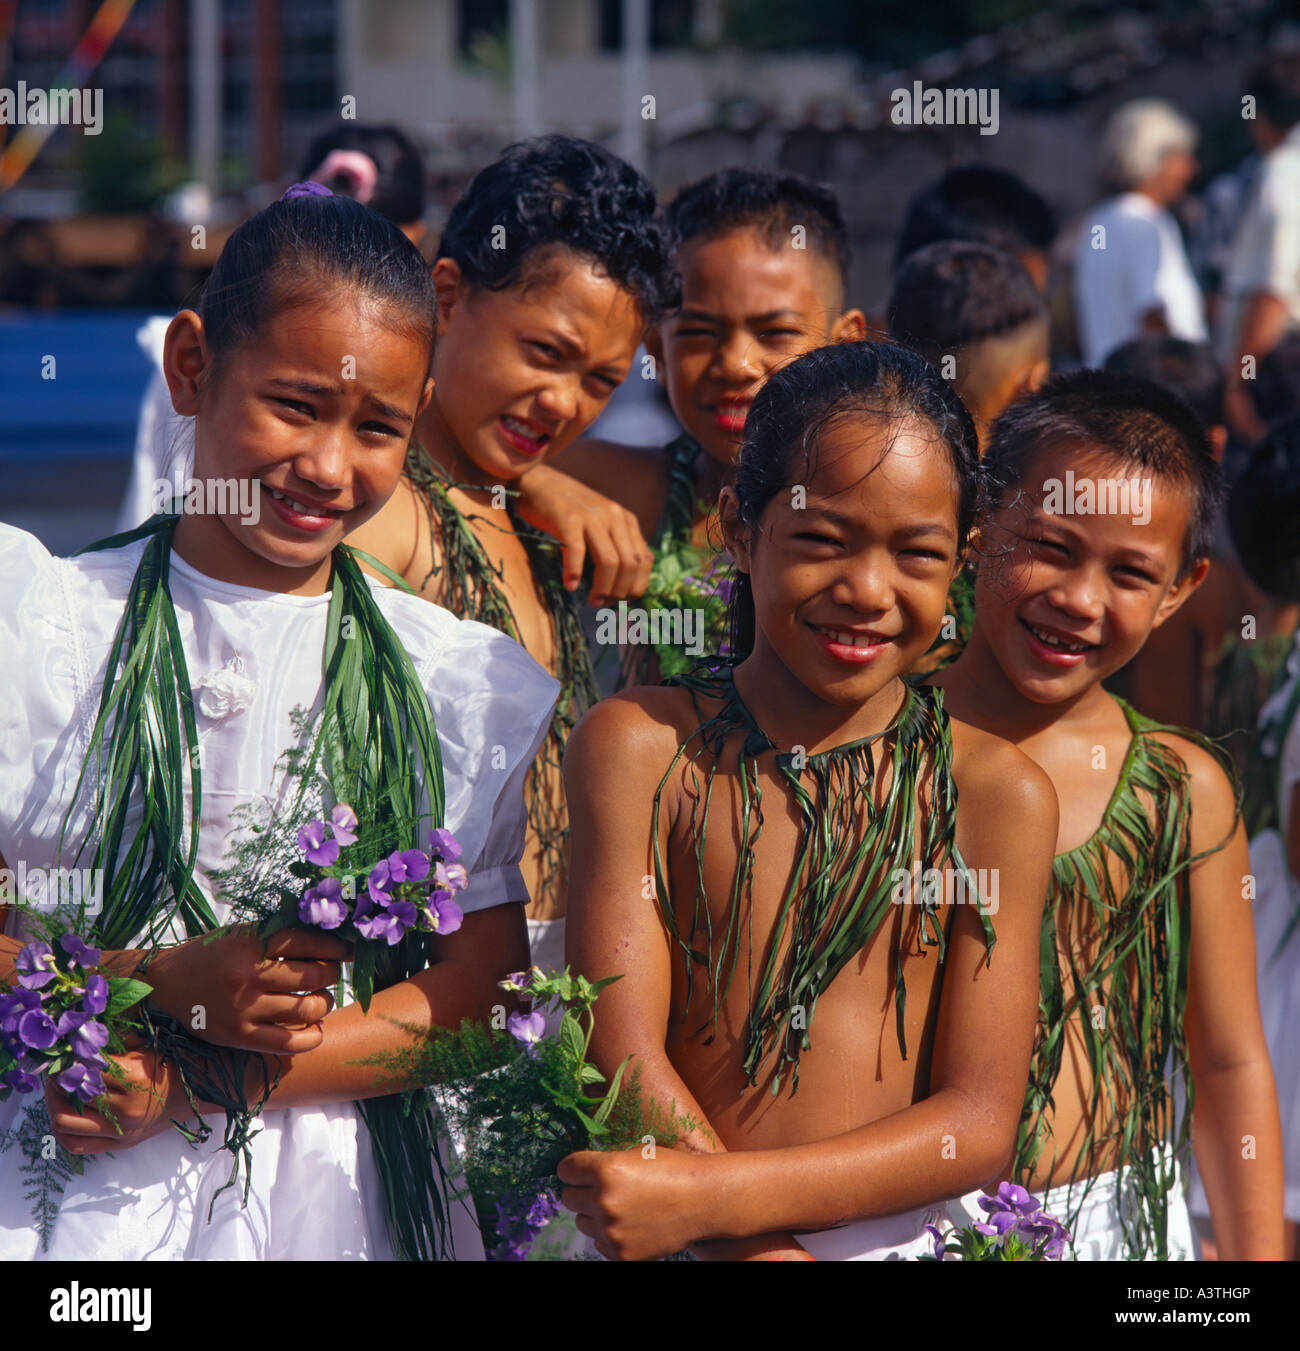 Young boy & girl dancers from the Northern Marianas Islands in traditional grass necklaces & girl with white dress and flowers Stock Photo